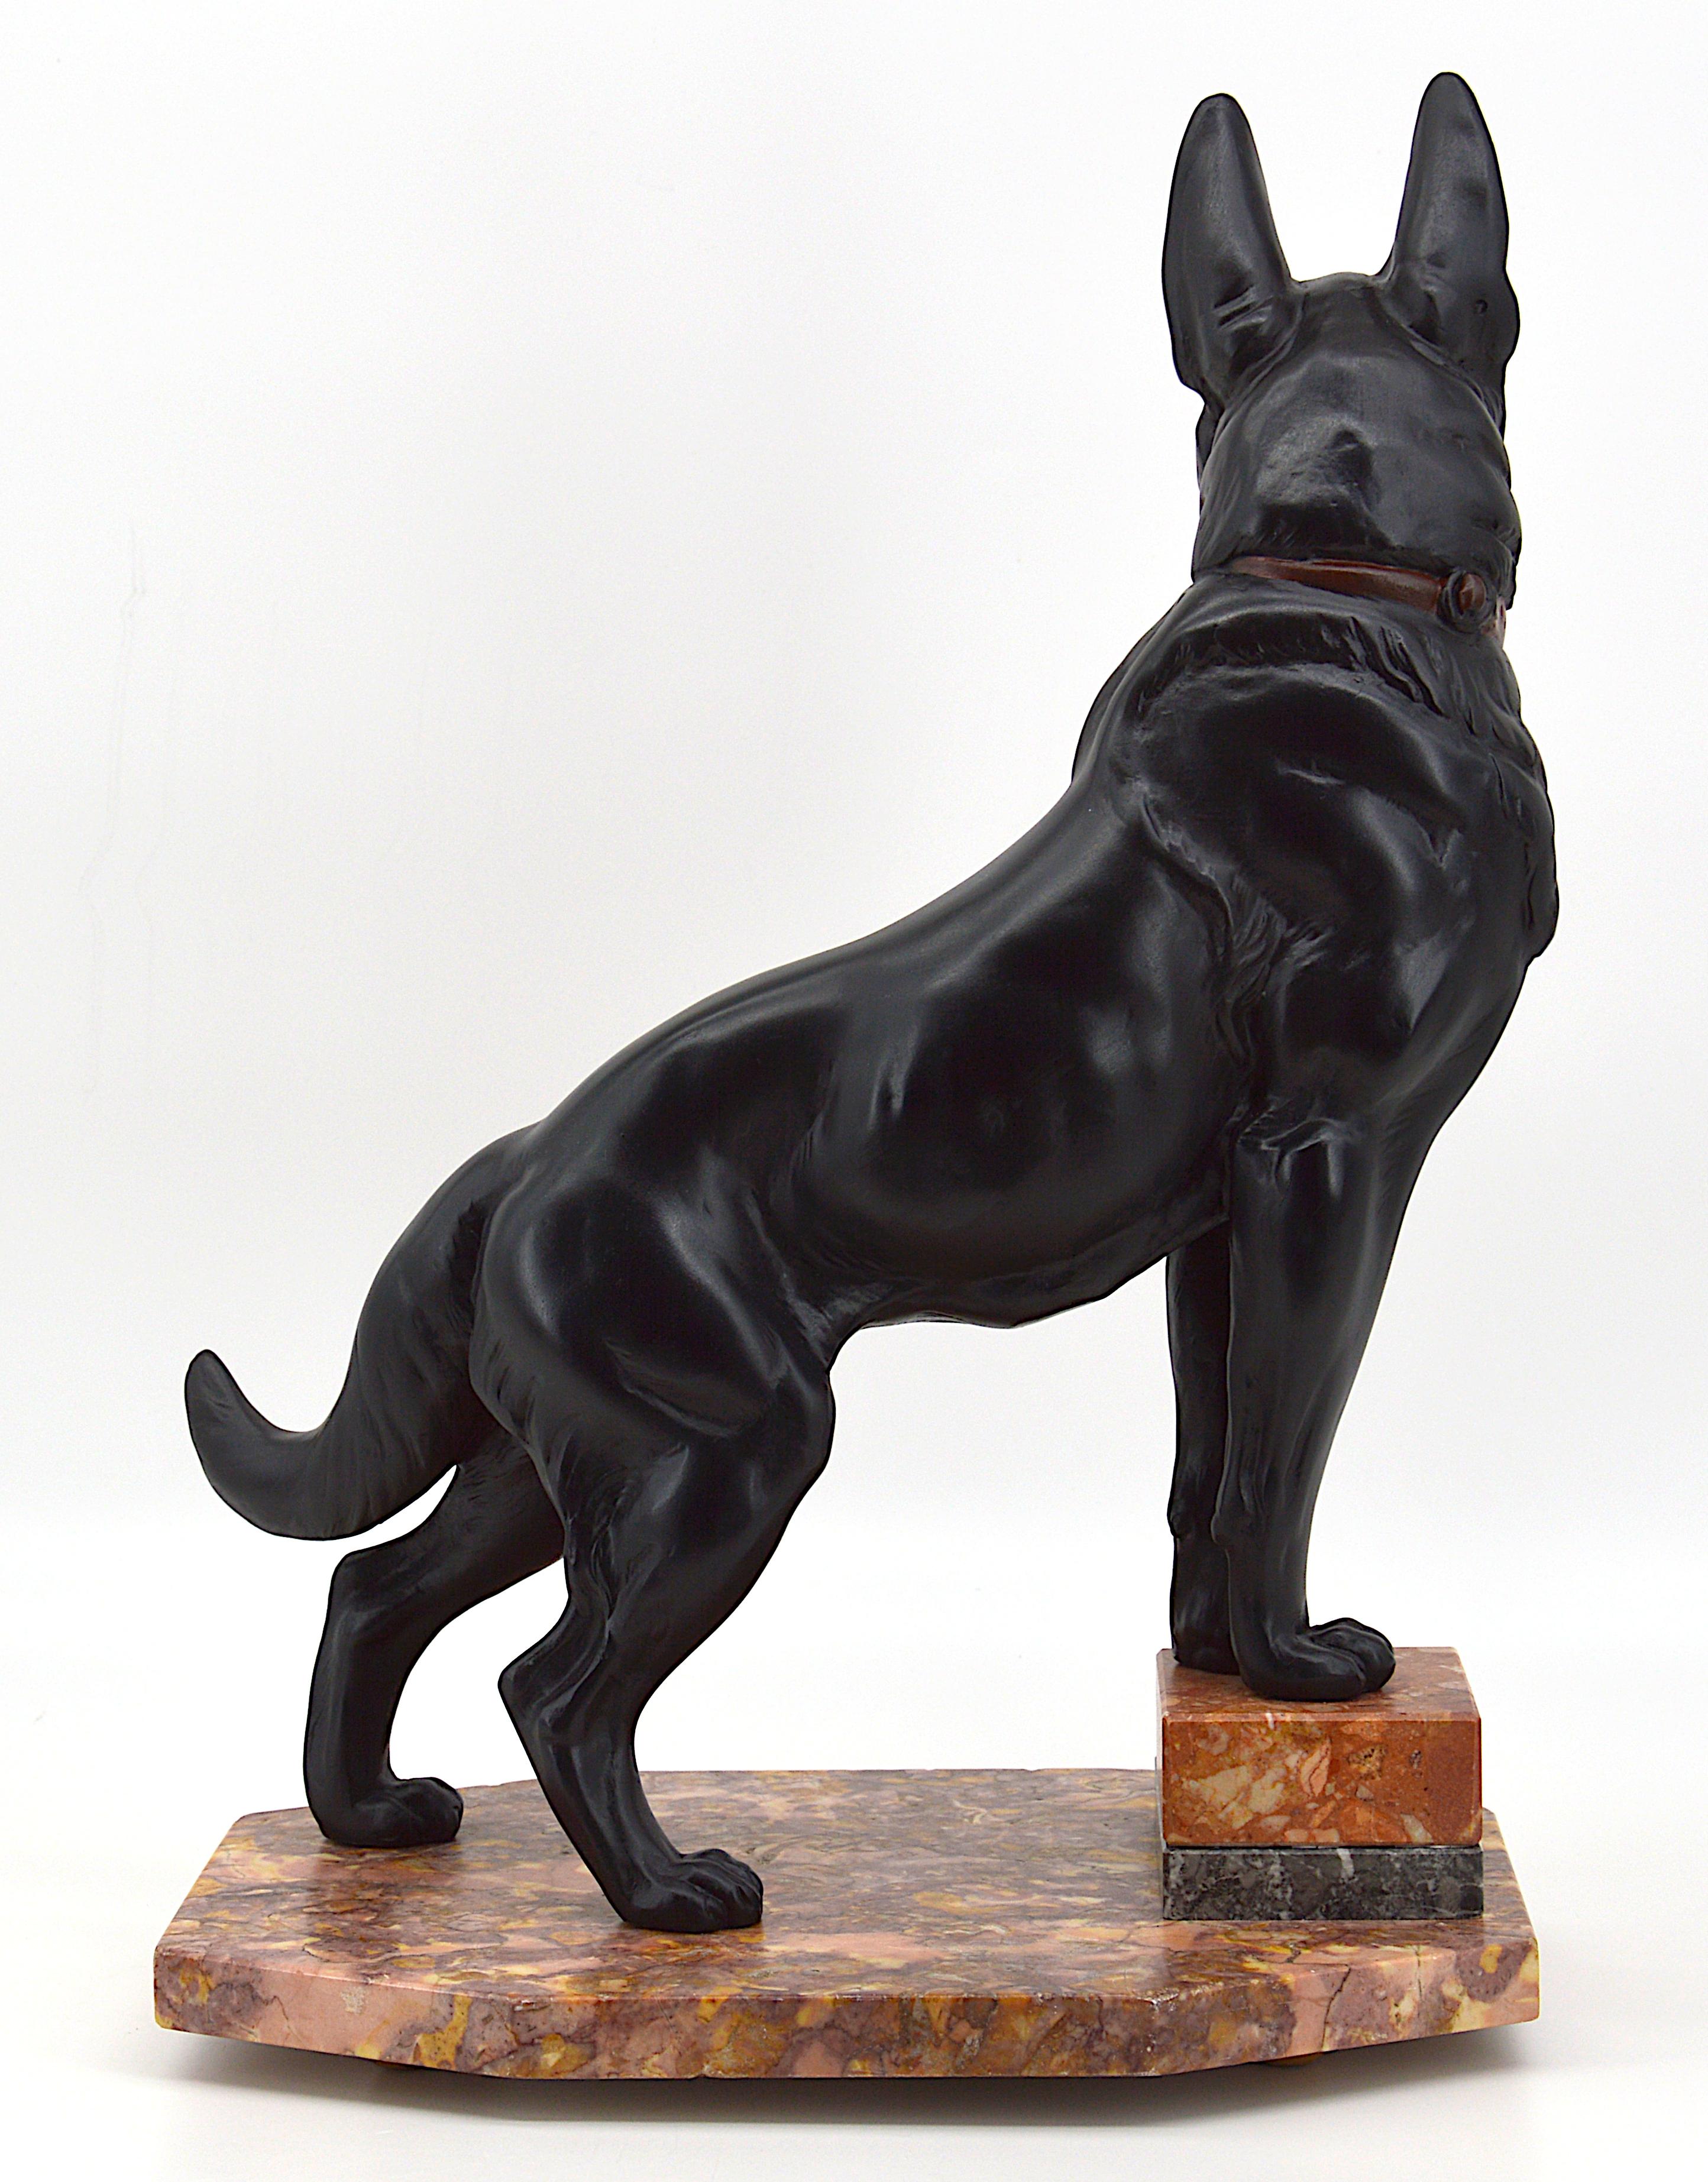 Huge German shepherd sculpture by Louis-Albert Carvin, France, circa 1930. Spelter and marble. Spelter dog. Marble base with stairs
Measures: Height 16